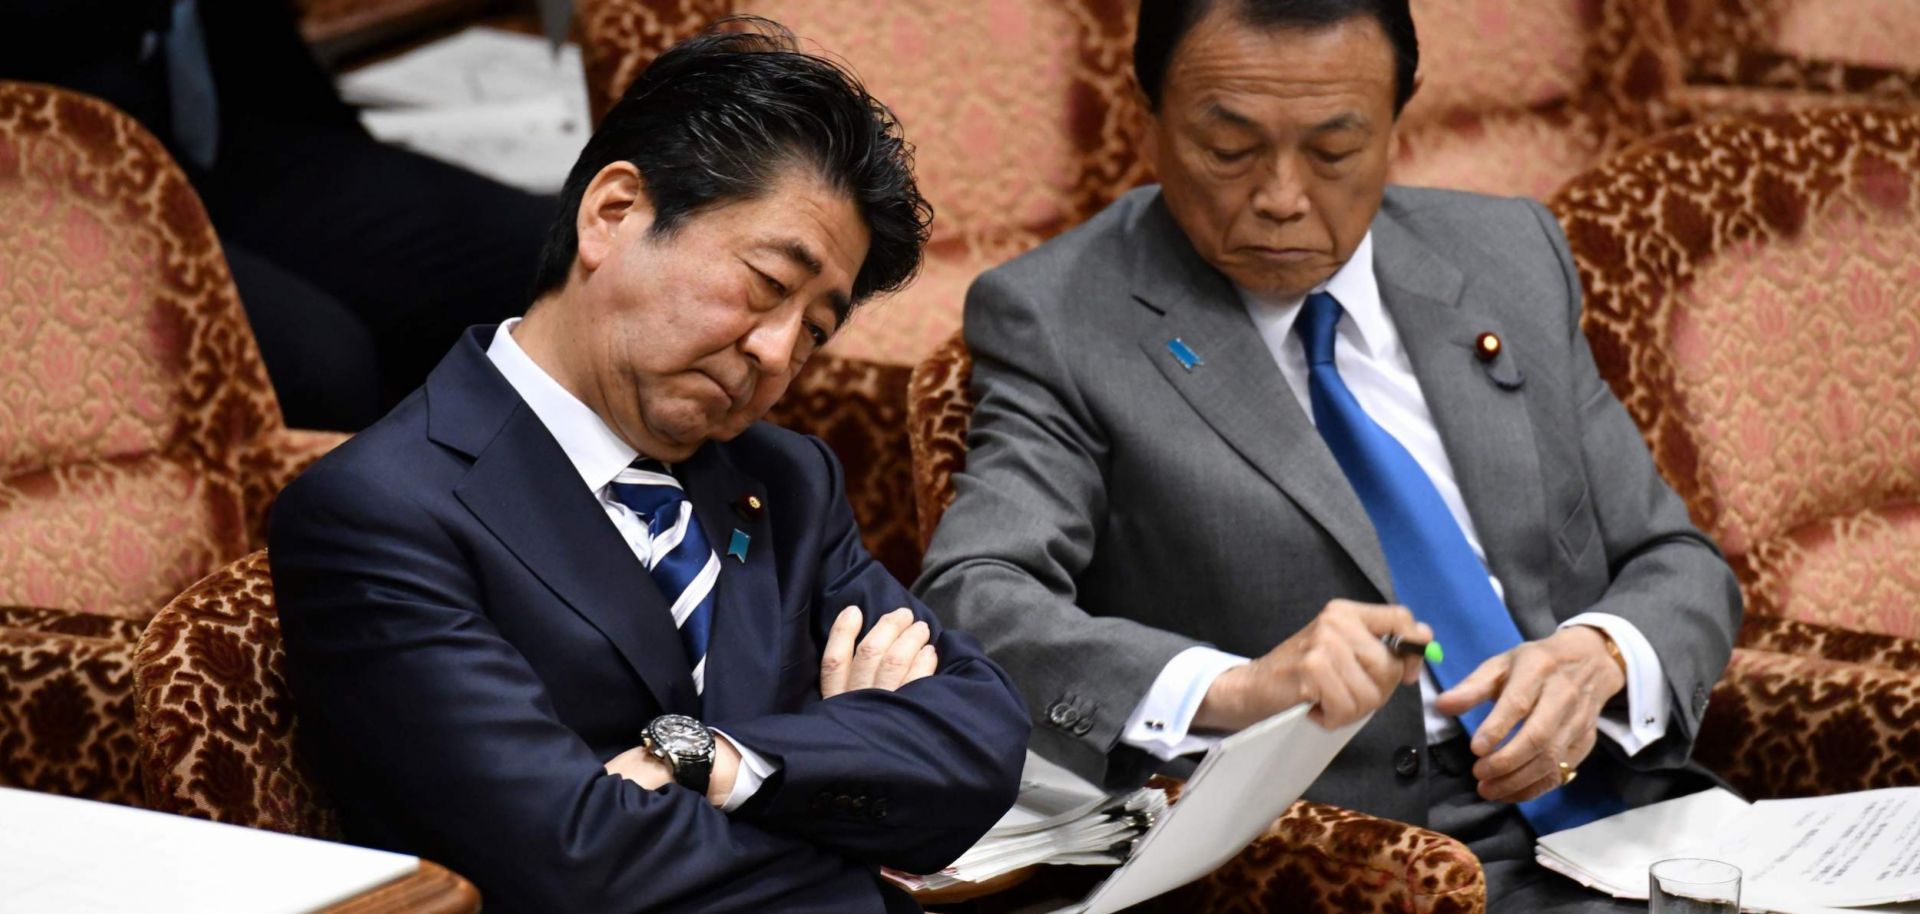 Shinzo Abe (left), prime minister of Japan, and Taro Aso, finance minister, attend a budget committee meeting in Tokyo on March 19, 2018.